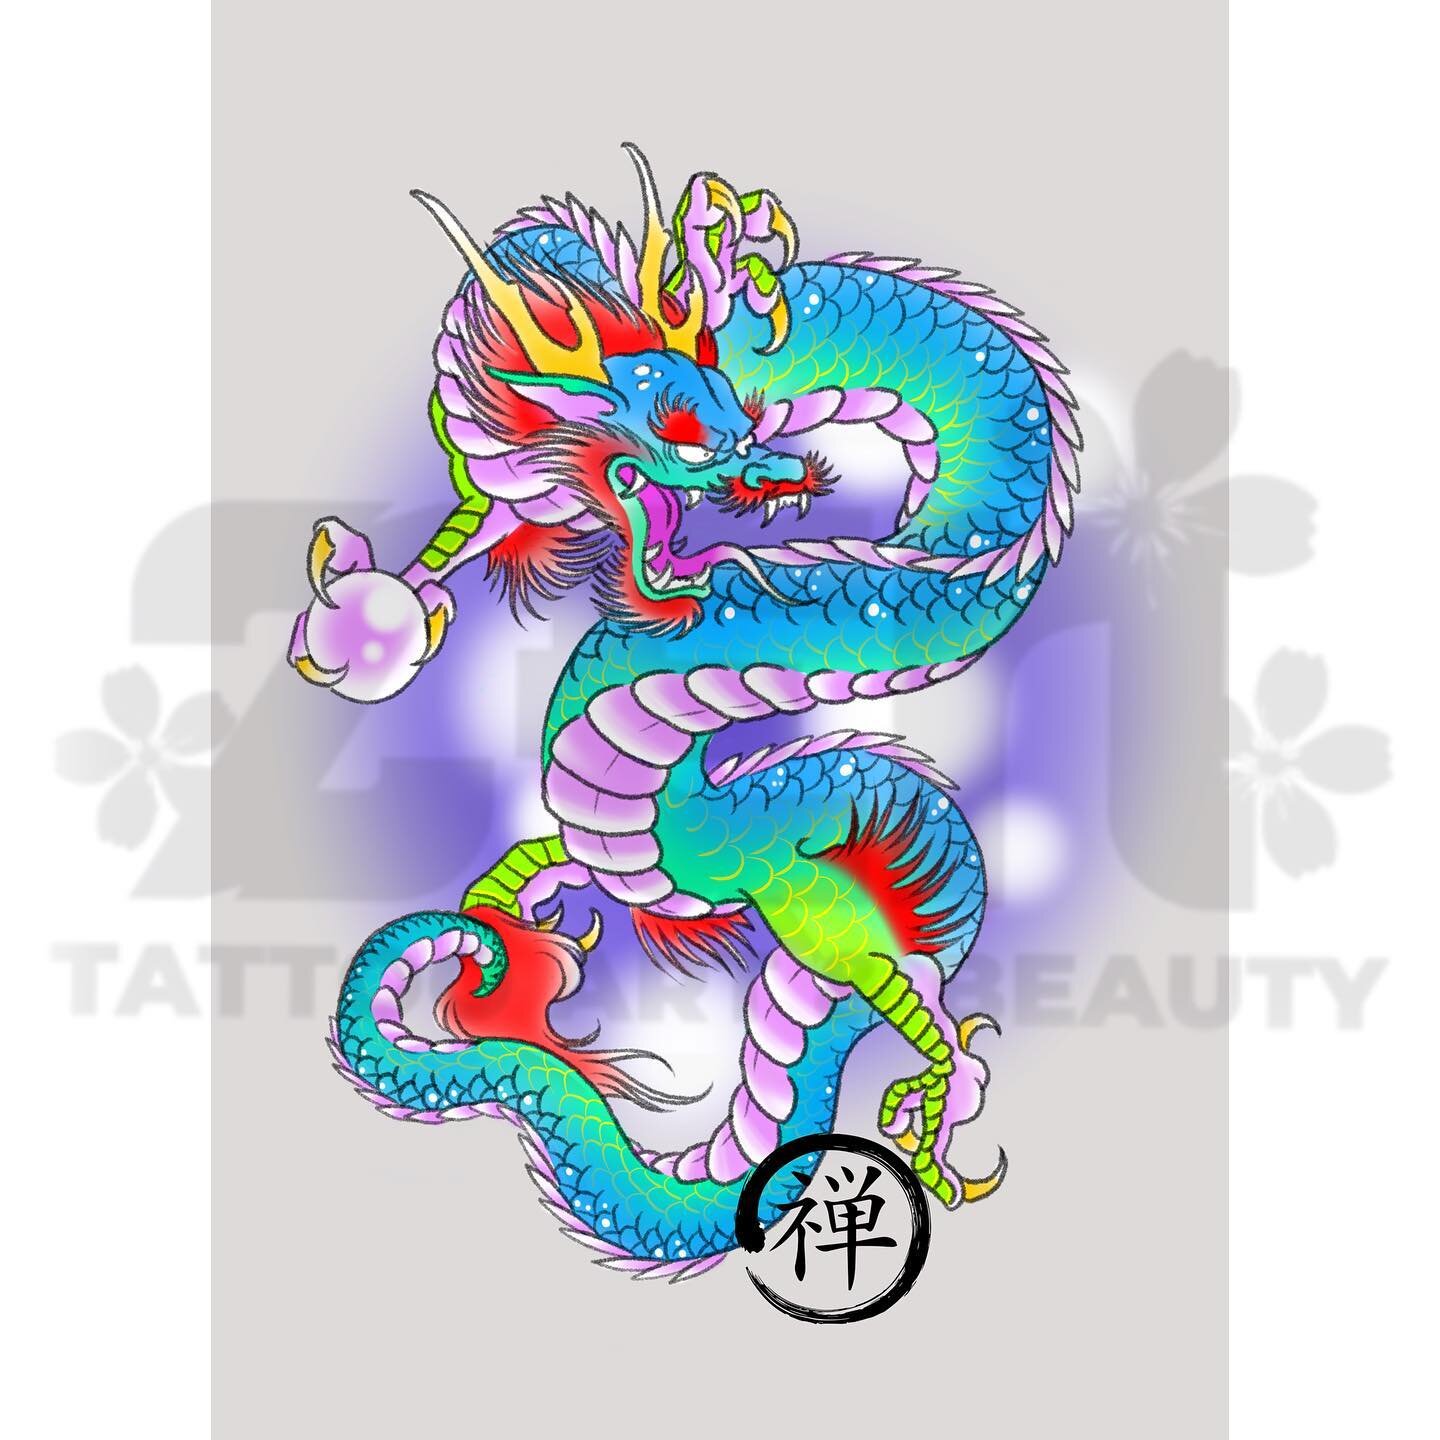 @william_tattoos has some unclaimed tattoo designs up for grabs at a heavy discount. Please email us to enquire. #tattoo #tattoos #like #follow #ink #inked #japanese #japanesetattoo #ryujin #dragon #backpiece #frontpiece